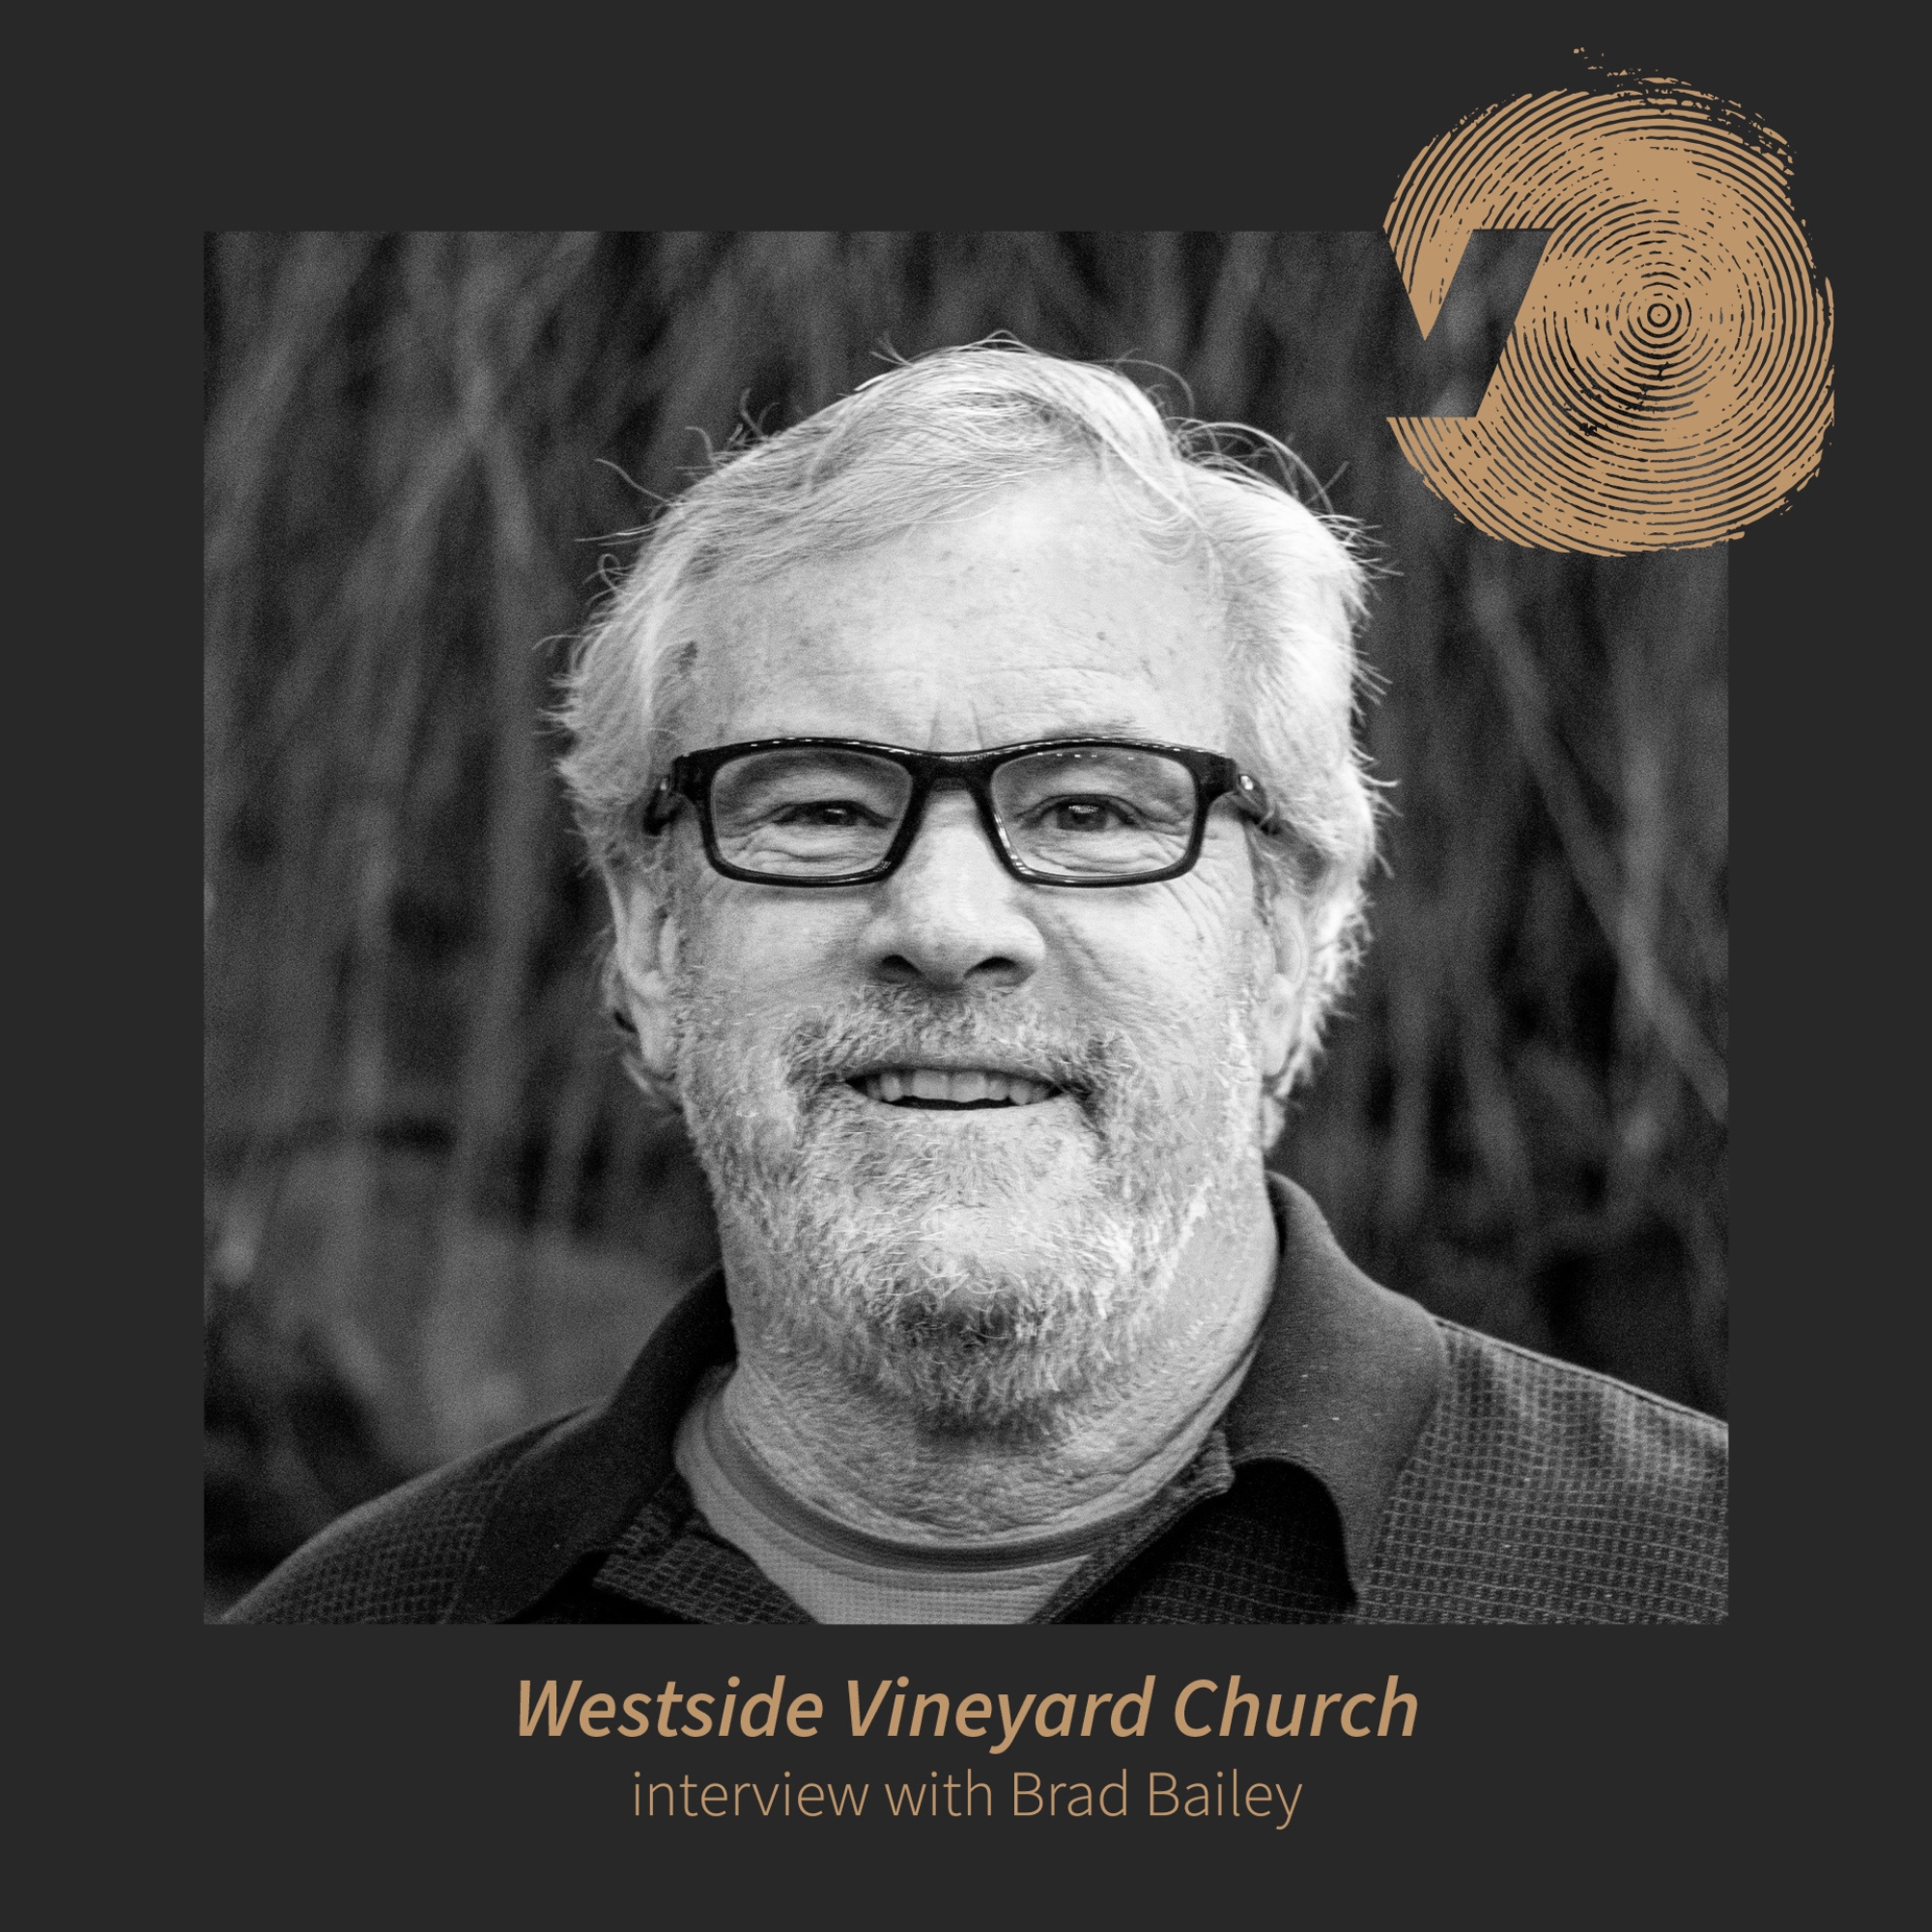 50 Years Of The Vineyard: The Story Of The Westside Vineyard with Brad Bailey and John Elmer